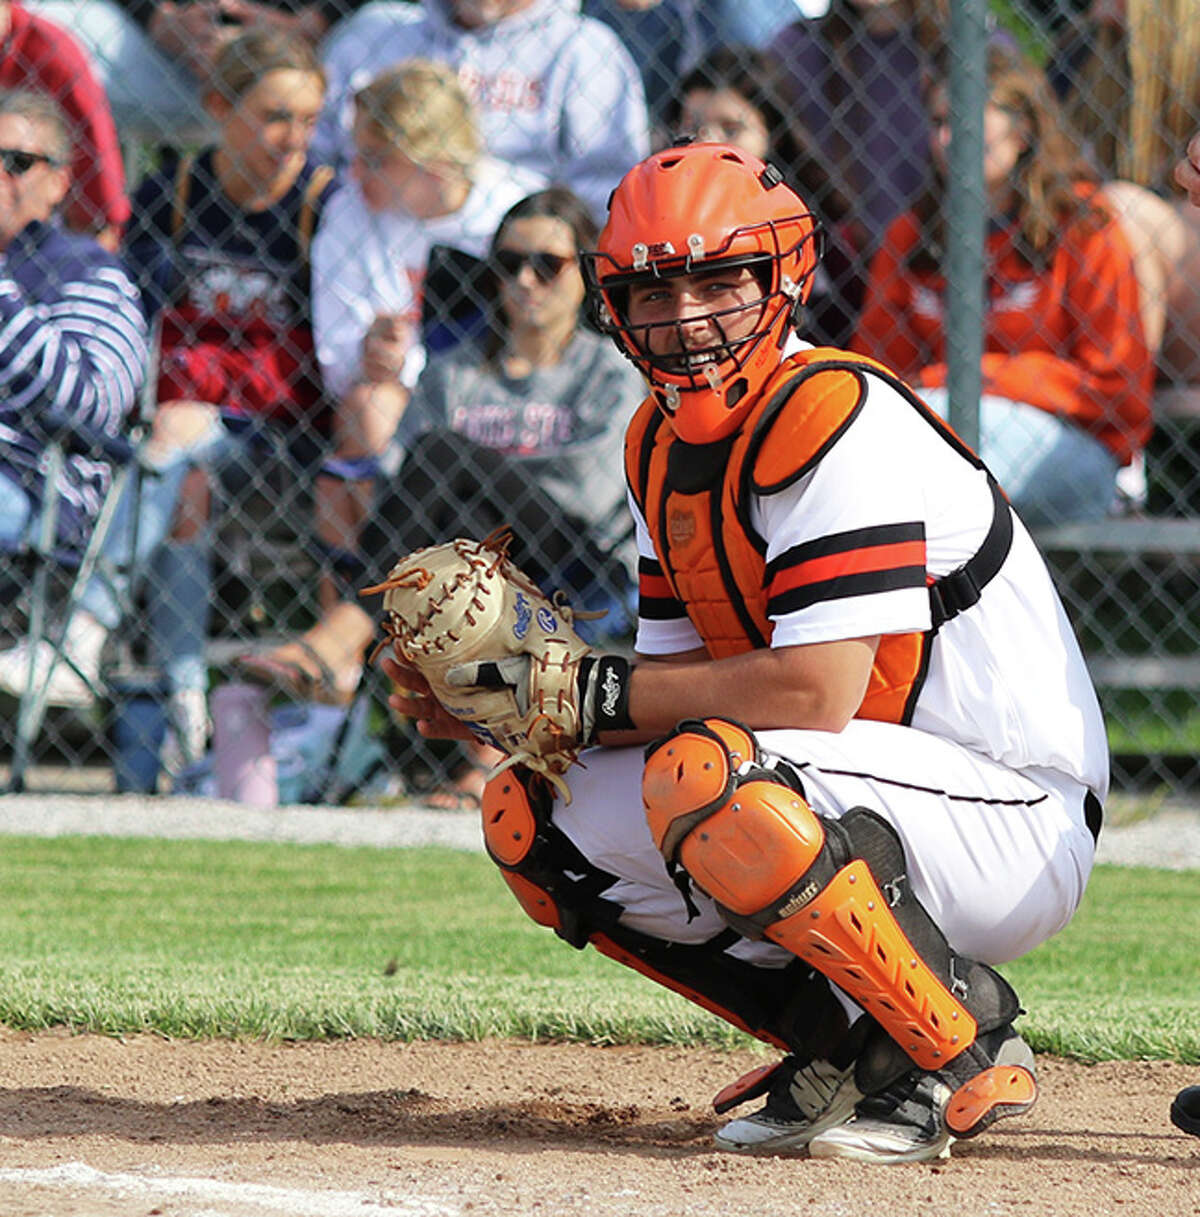 Gillespie senior catcher Gavin Griffith looks to the dugout for a sign in Monday's Class 2A regional title game against New Berlin in Gillespie. Griffith's walk-off RBI single in the seventh inning gave the Miners a win and a trip to this week's Pleasant Plains Sectional.